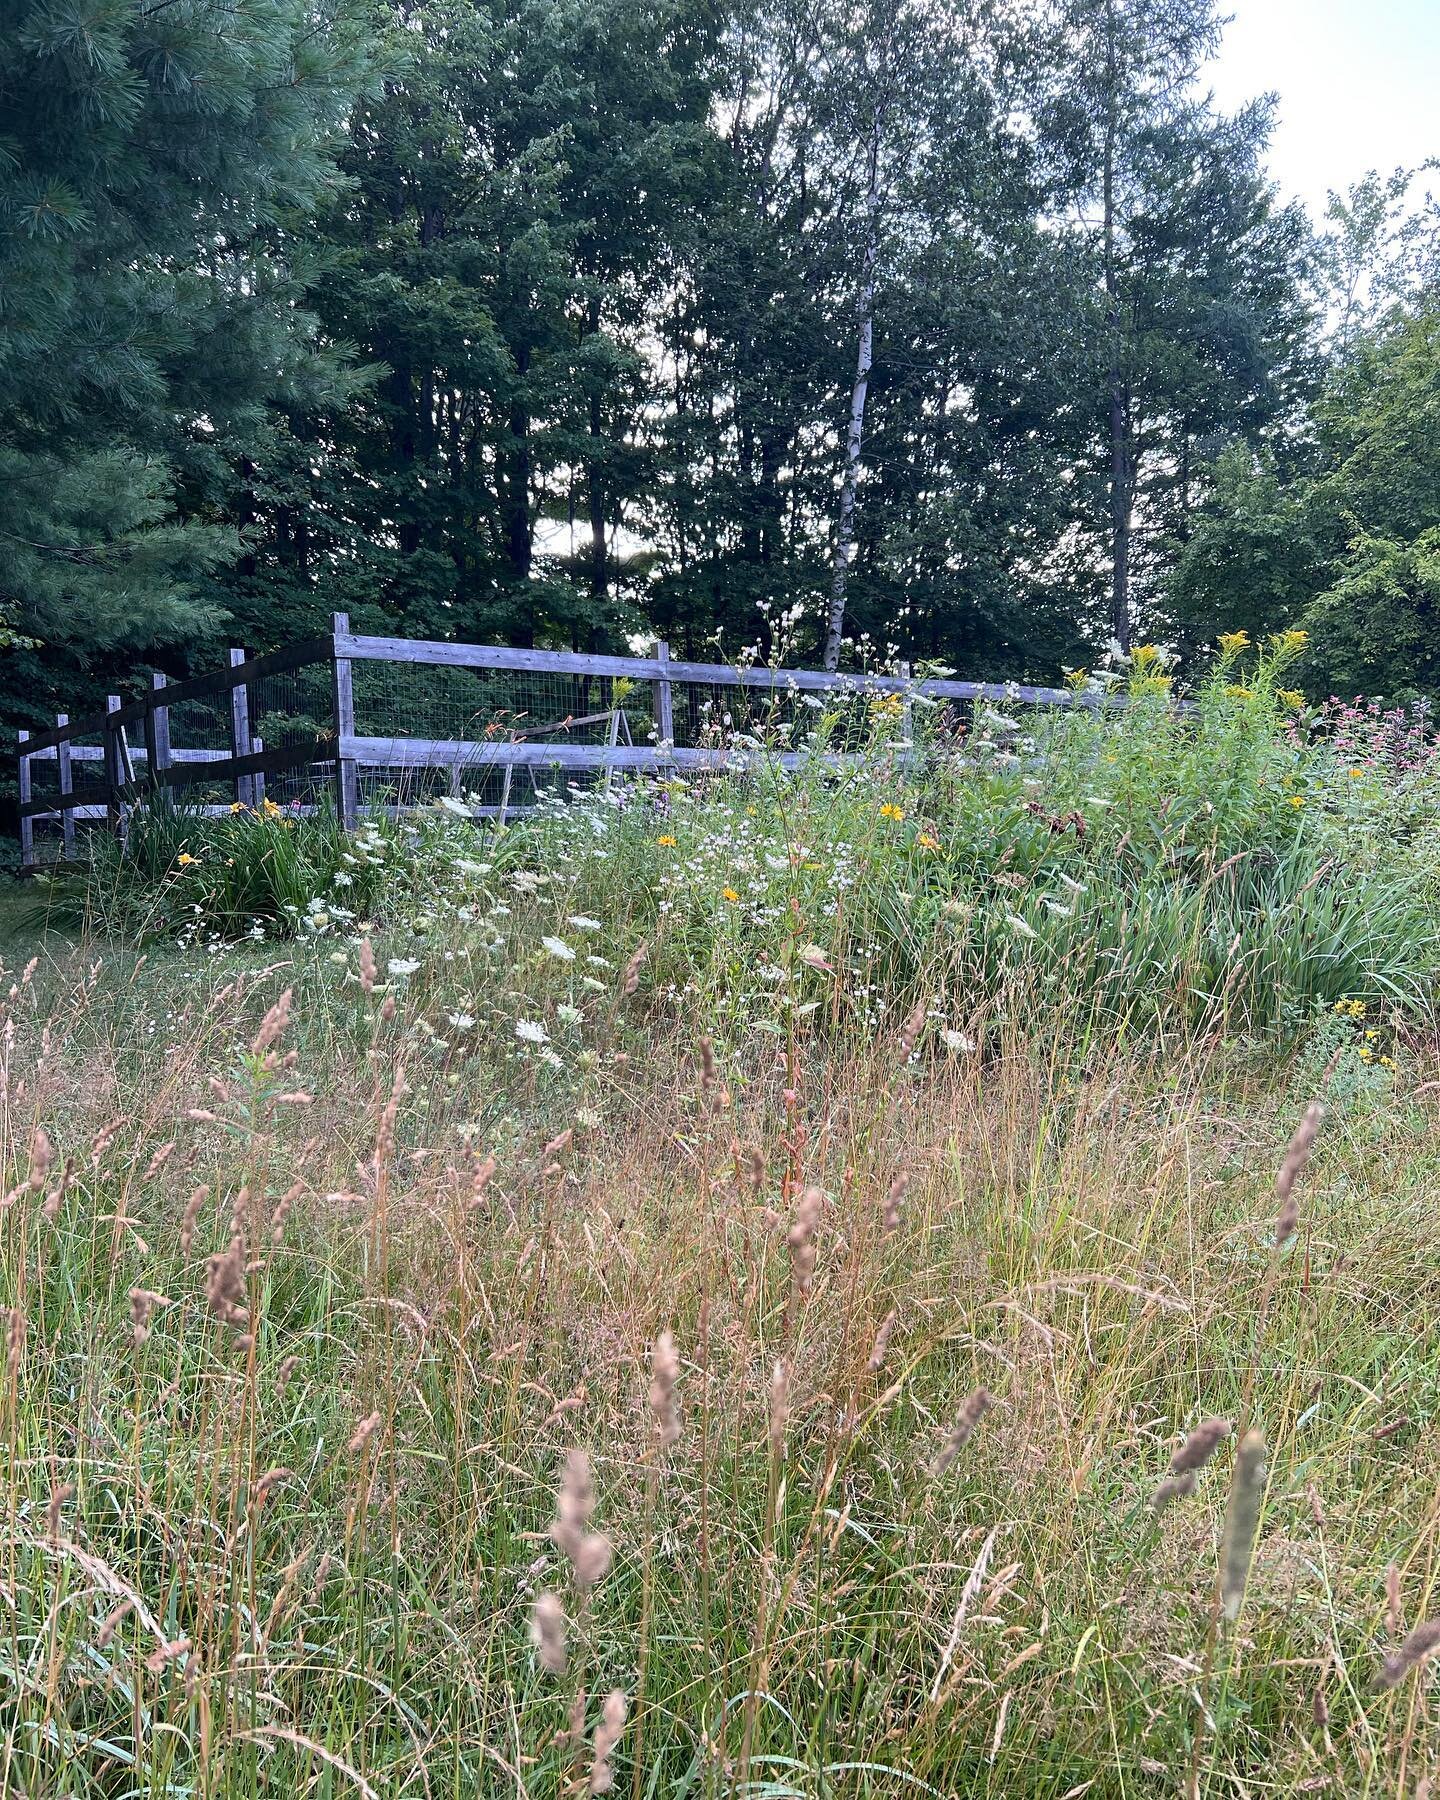 Morning light at the home garden. Where the #nativewildflowers are mixing with the perennial gardens and #nomowmay turned into #nomowsummer! #siteformstudio #residentiallandscapearchitecture #wildflowermeadow #nativeplants #landscapeecology